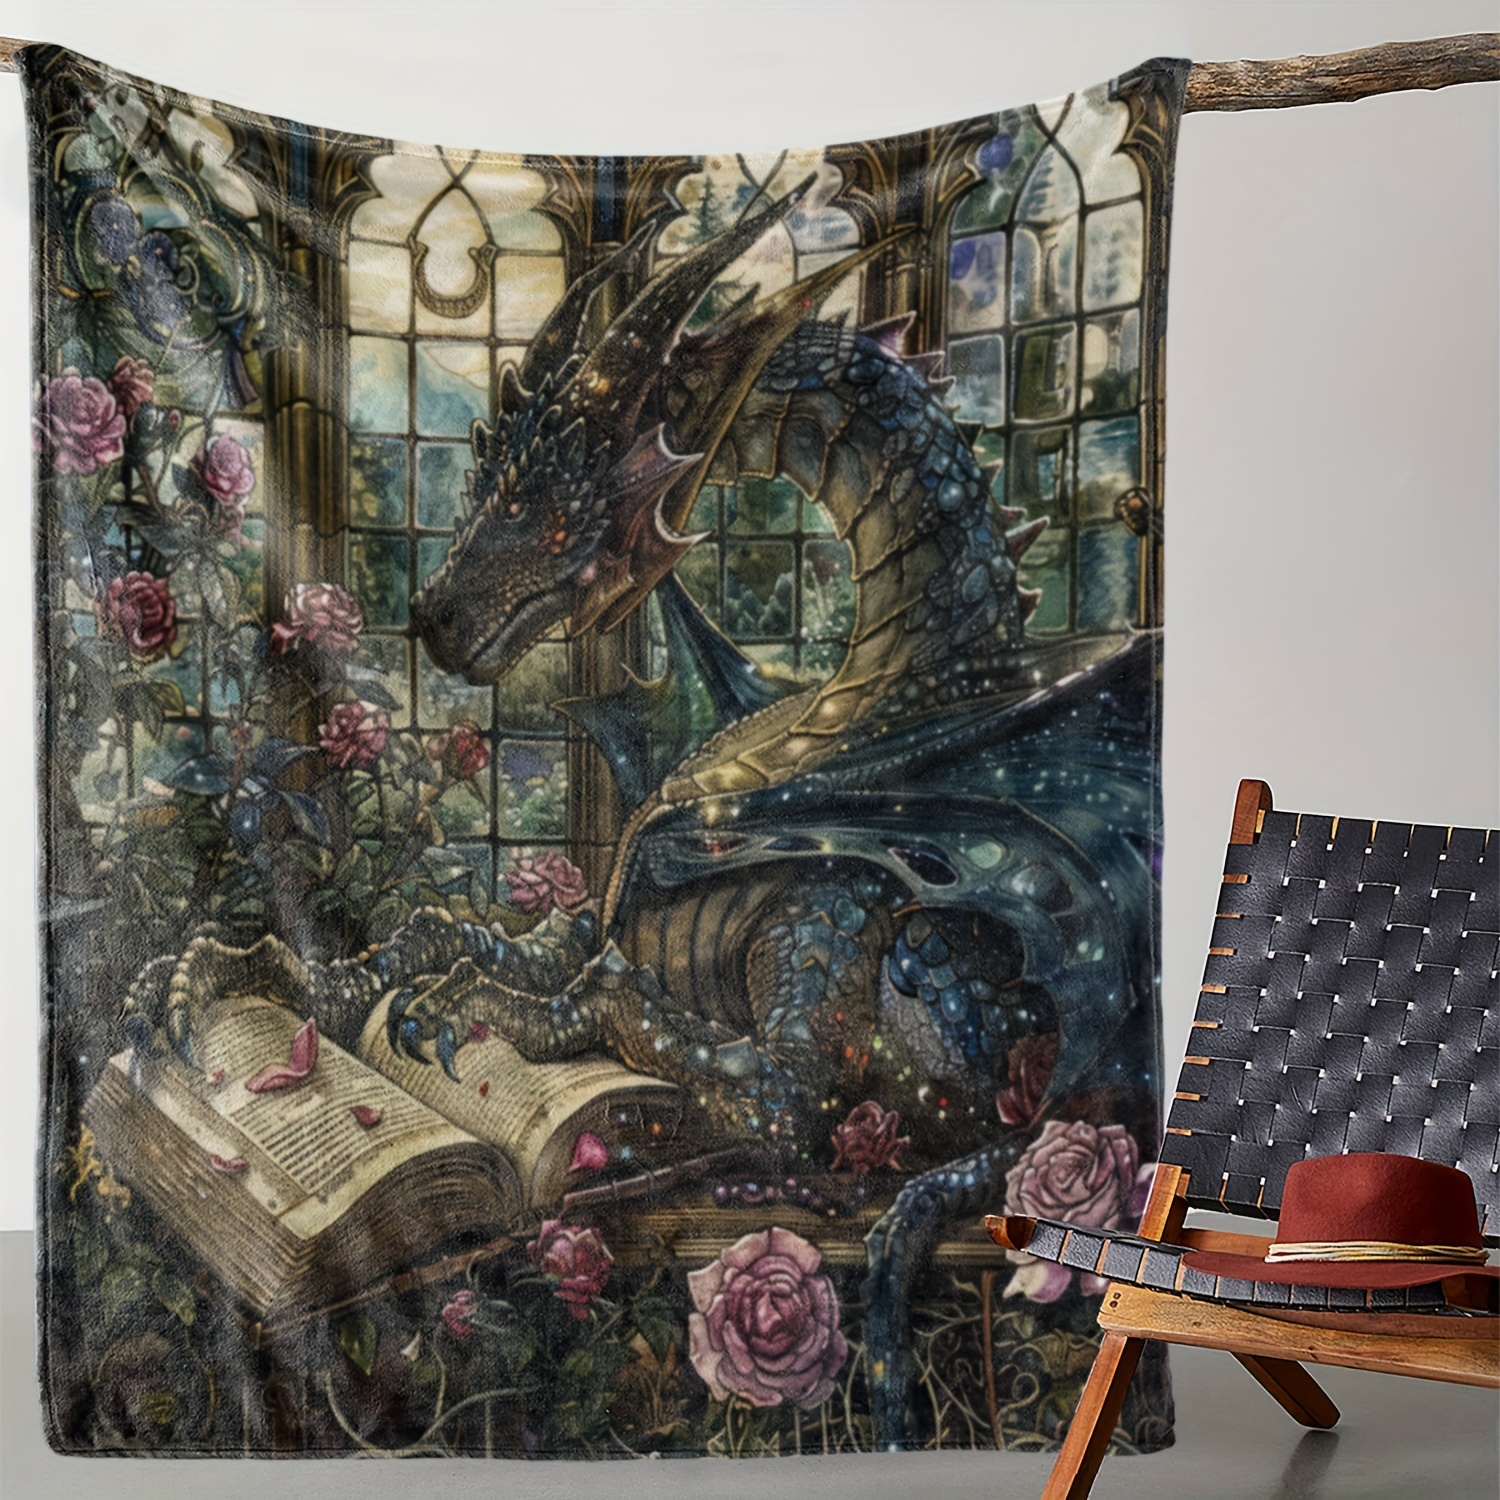 

Vintage Print Flannel Throw Blanket - Soft, Warm, Cozy Polyester Decorative Blanket With Floral Patterns - Ideal For Sofa, Bed, Travel, Office - Unique Dinosaur Design For All Seasons